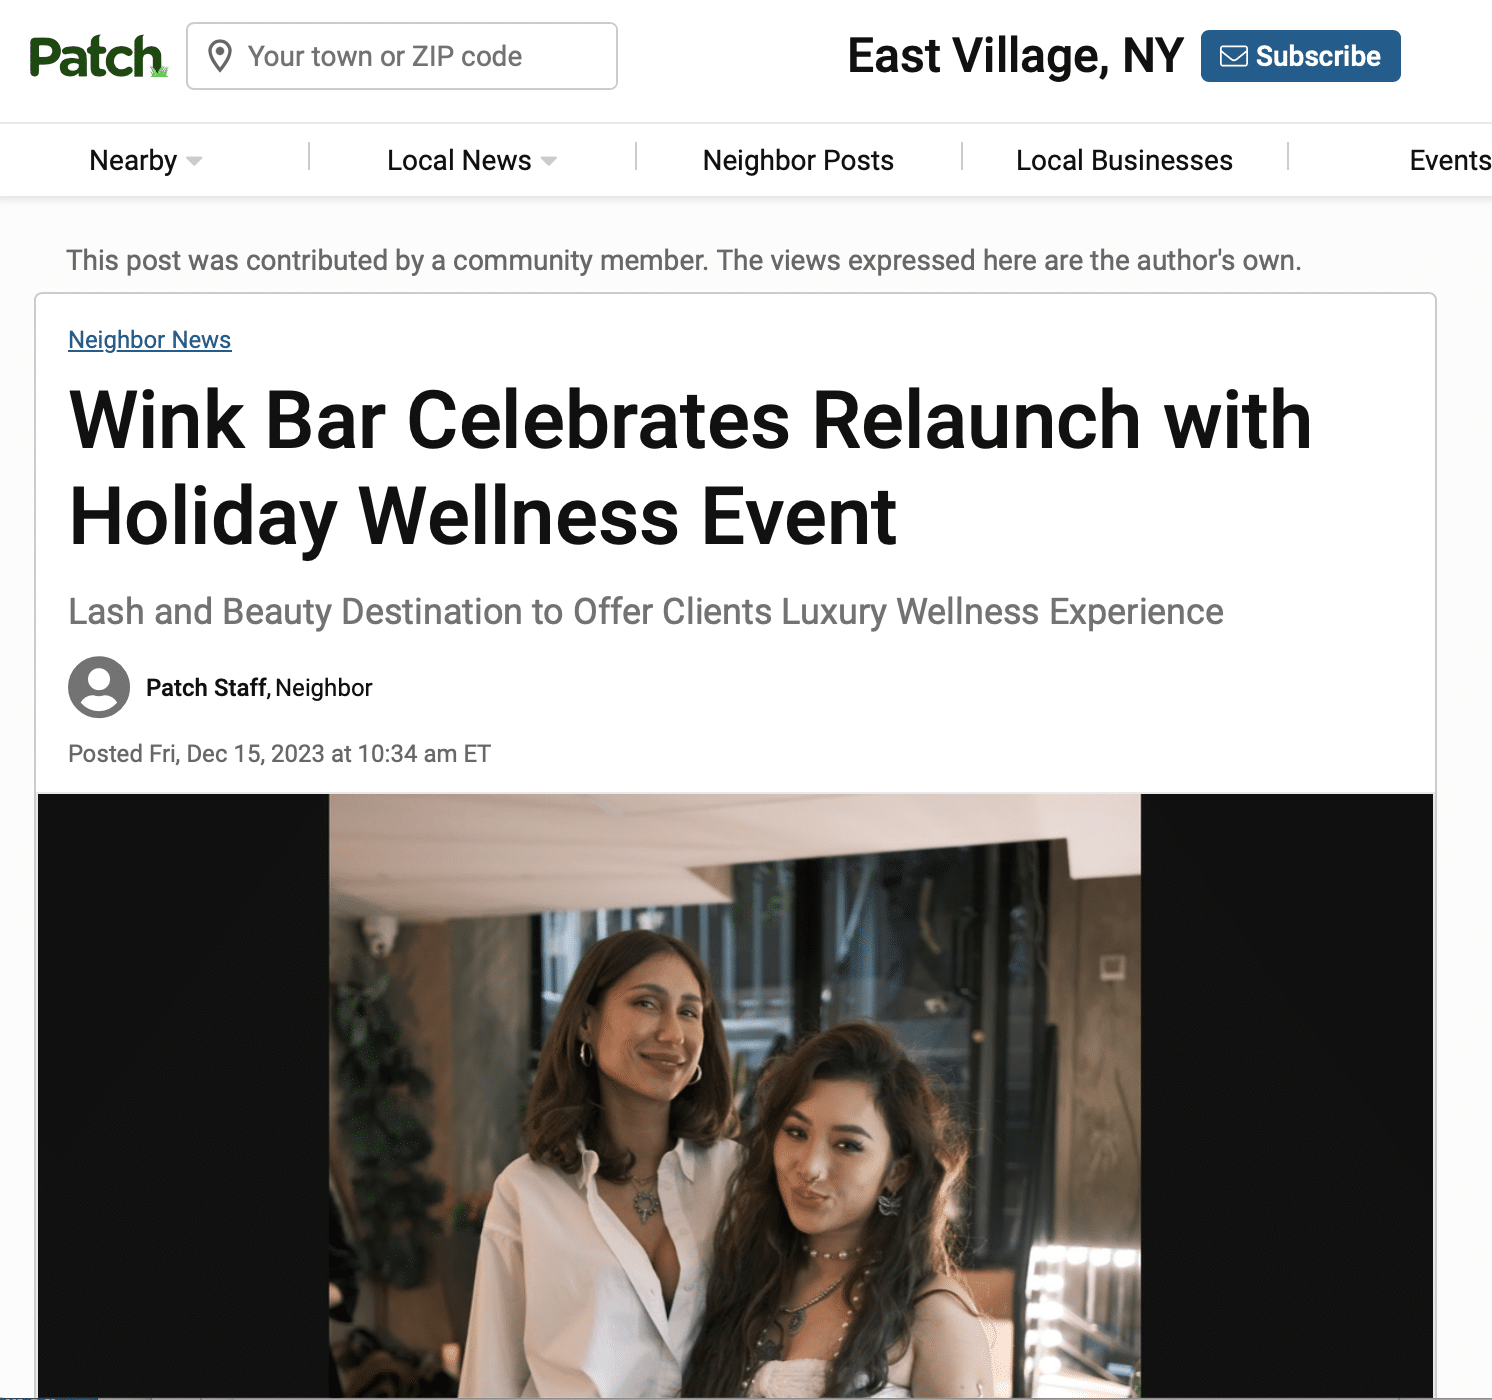 Wink Bar Celebrates Relaunch with Holiday Wellness Event by Casa Innovacion